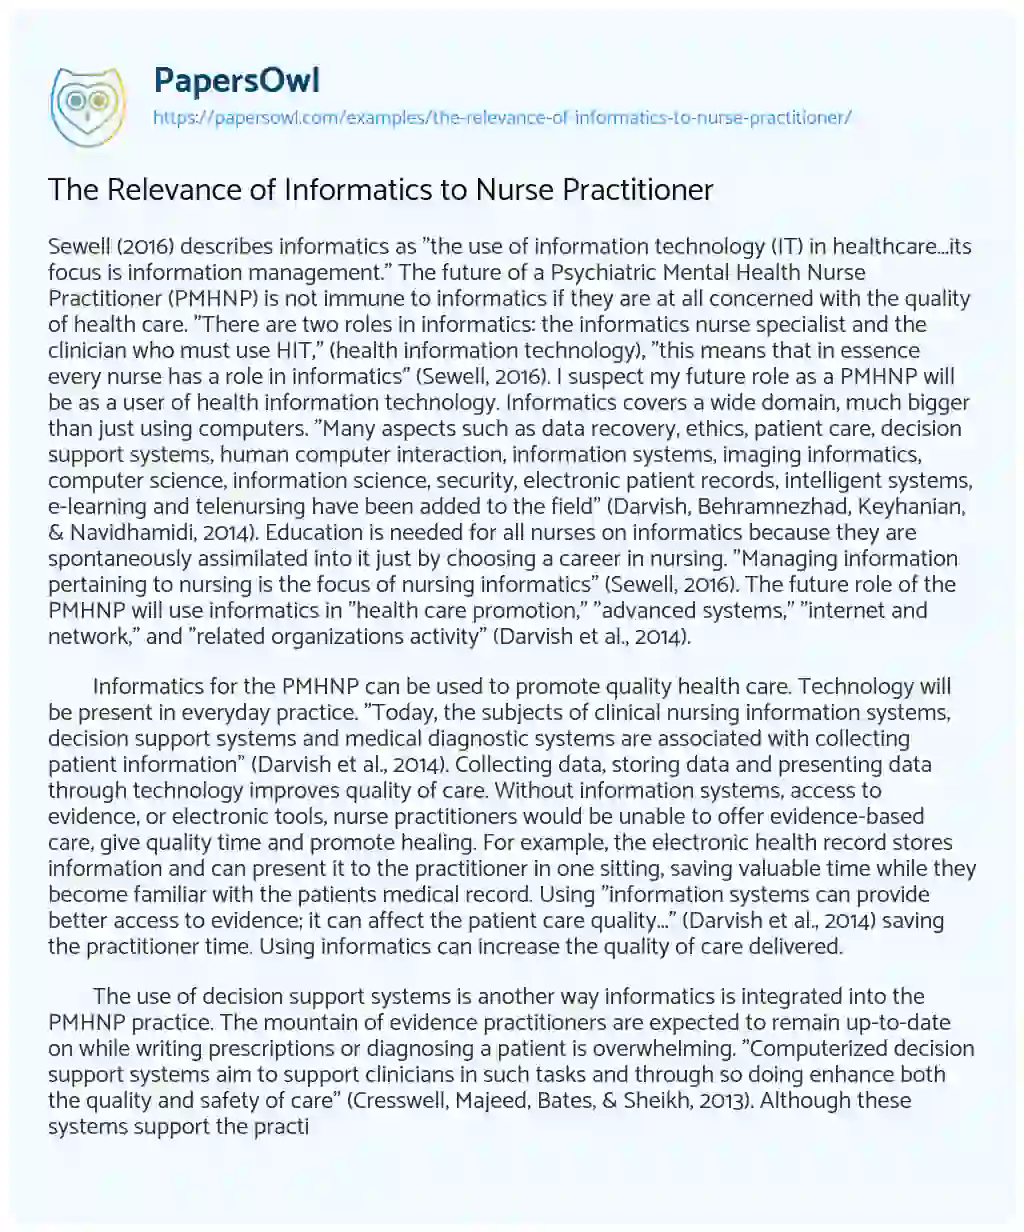 Essay on The Relevance of Informatics to Nurse Practitioner